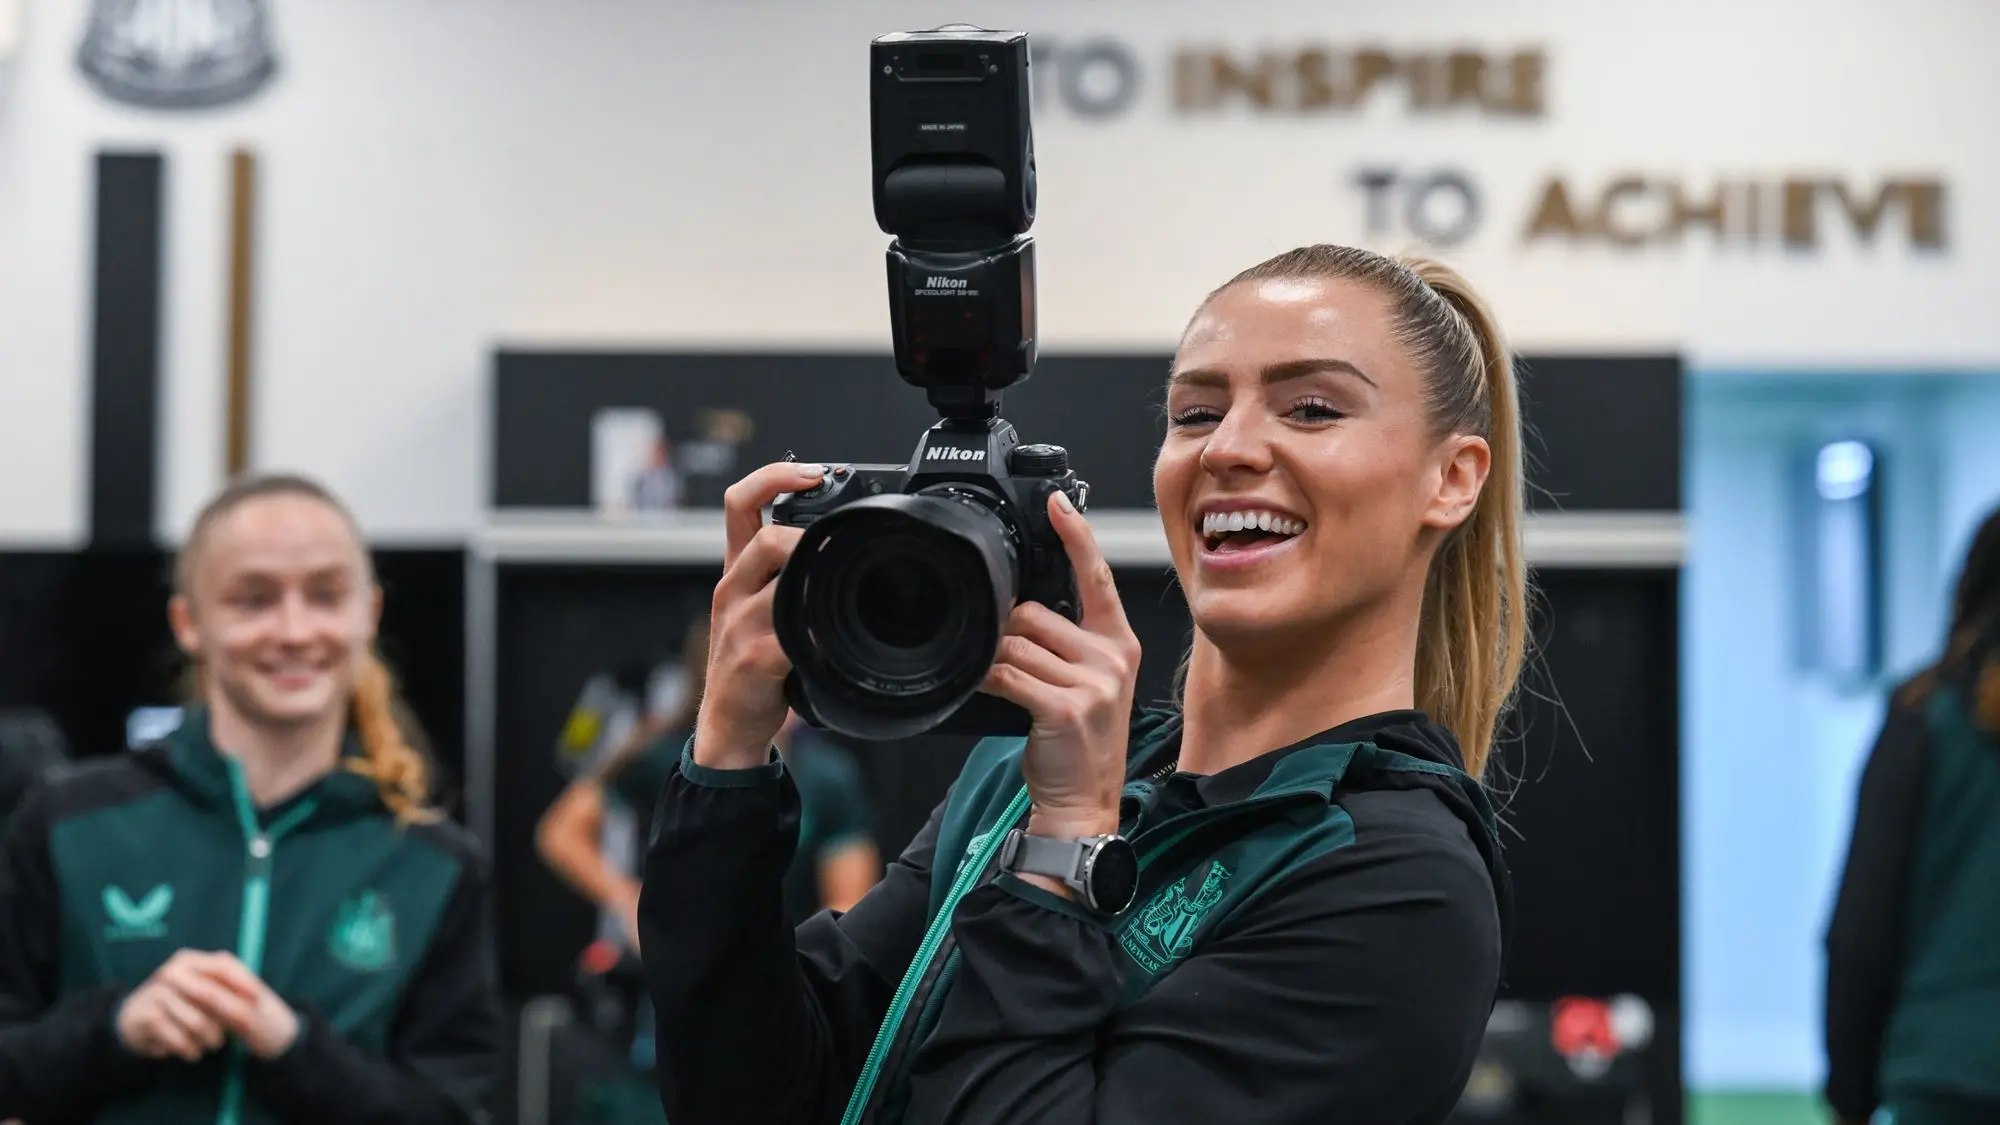 Newcastle United Women's Team player, Emma Kelly, with camera